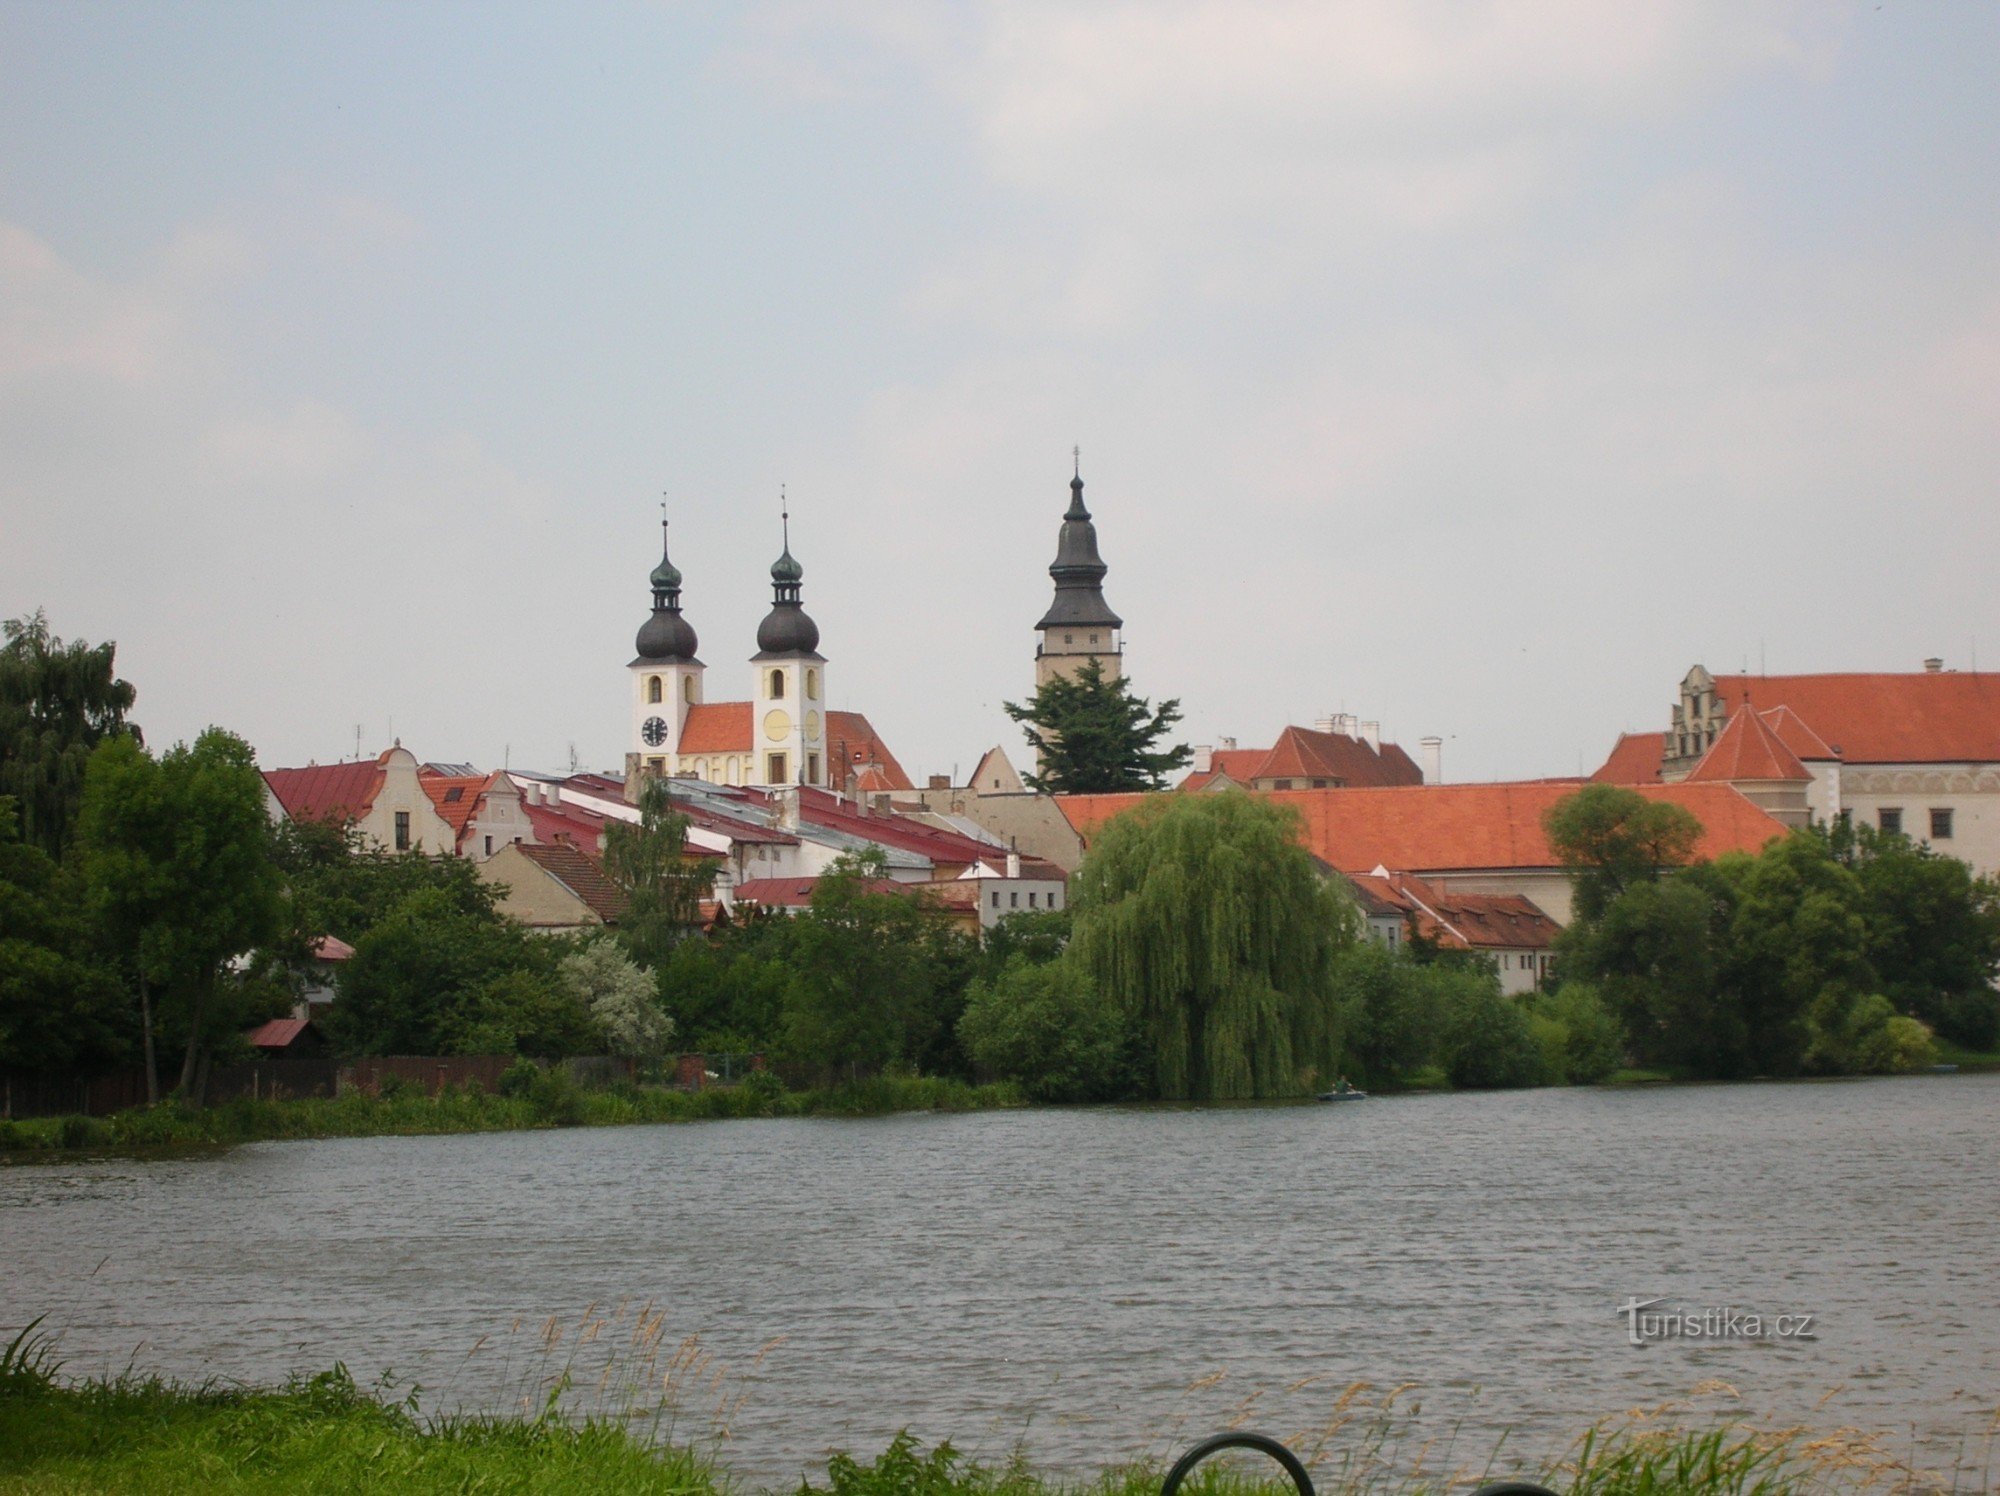 View of the city of Telč